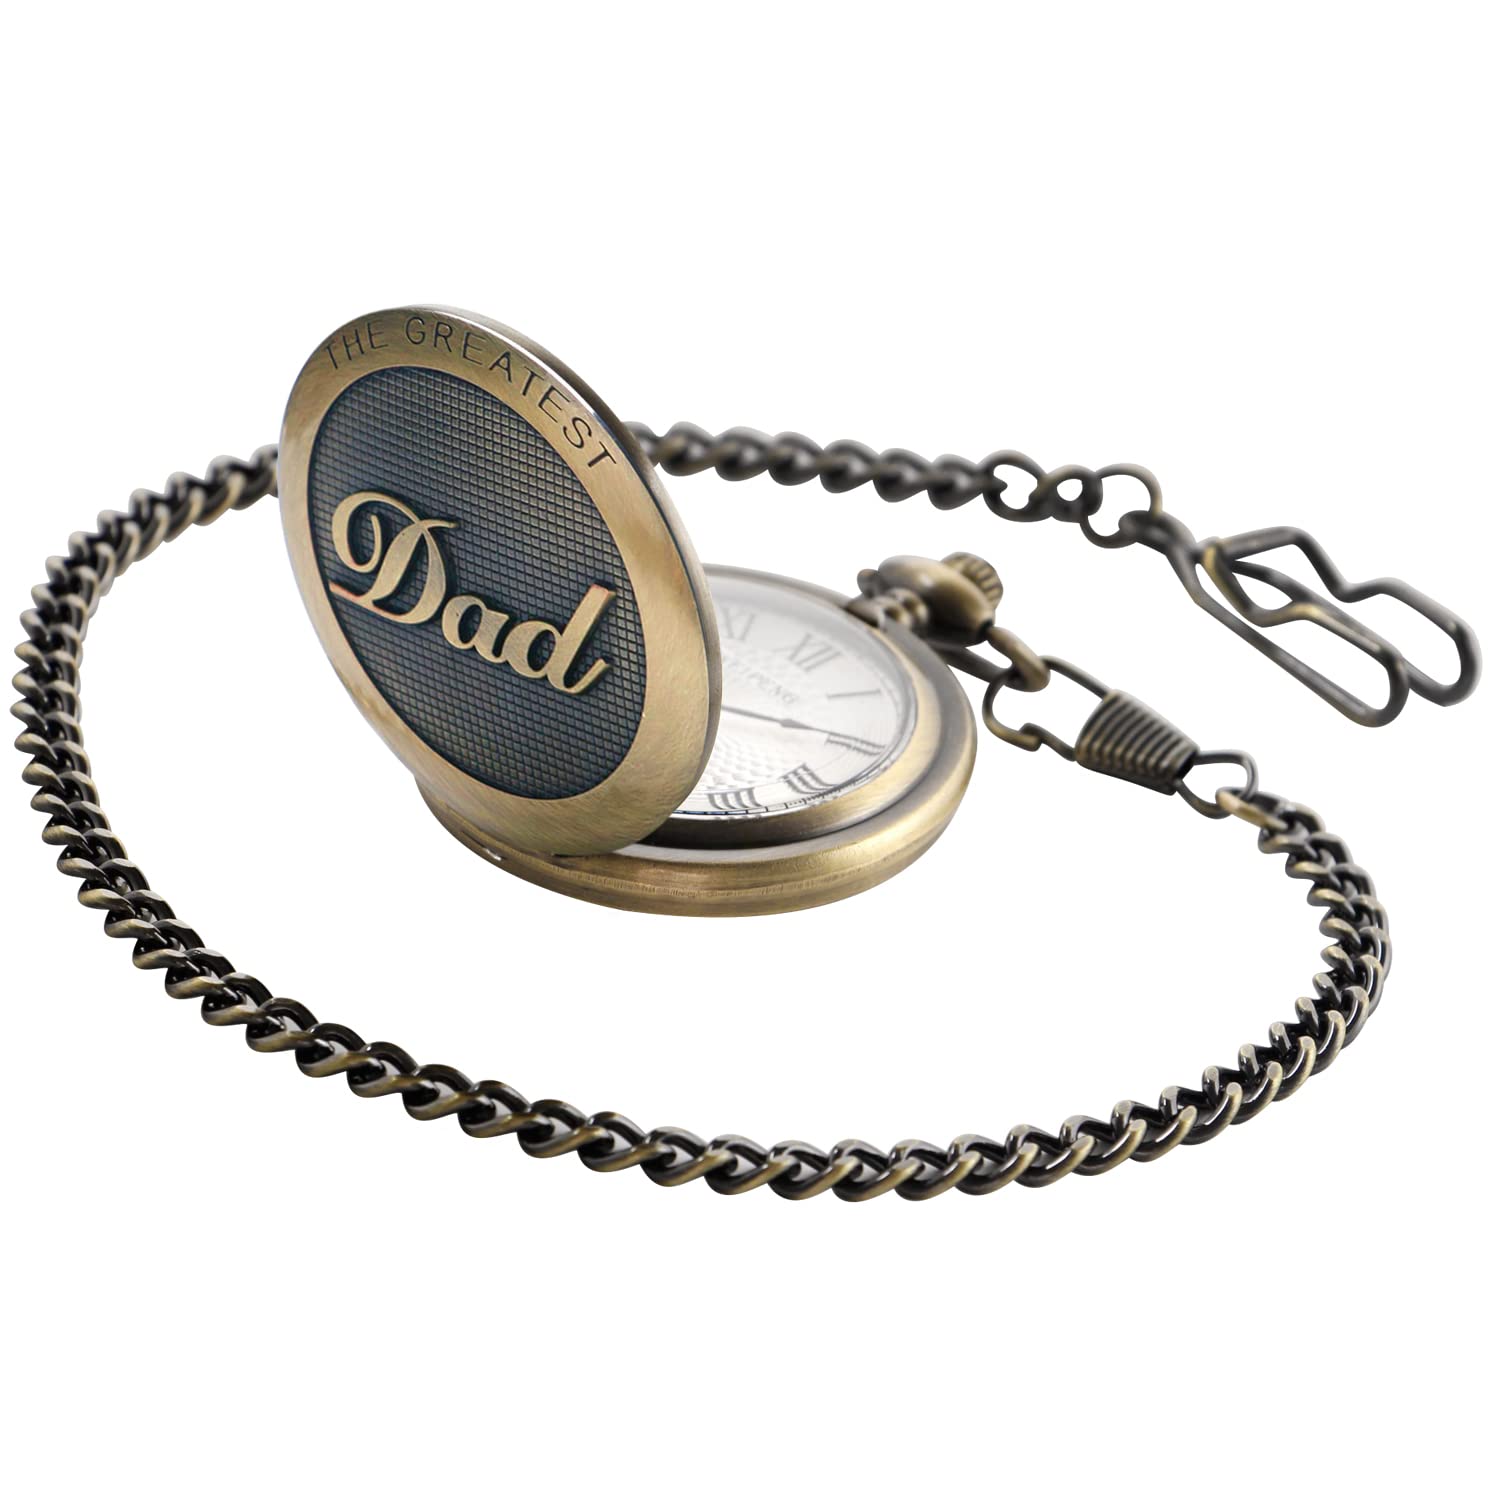 SwitchMe to My Greatest Dad Quartz Pocket Watch for Dad Engraved Watches Fob Chain Clock for Dad Birthday Gifts